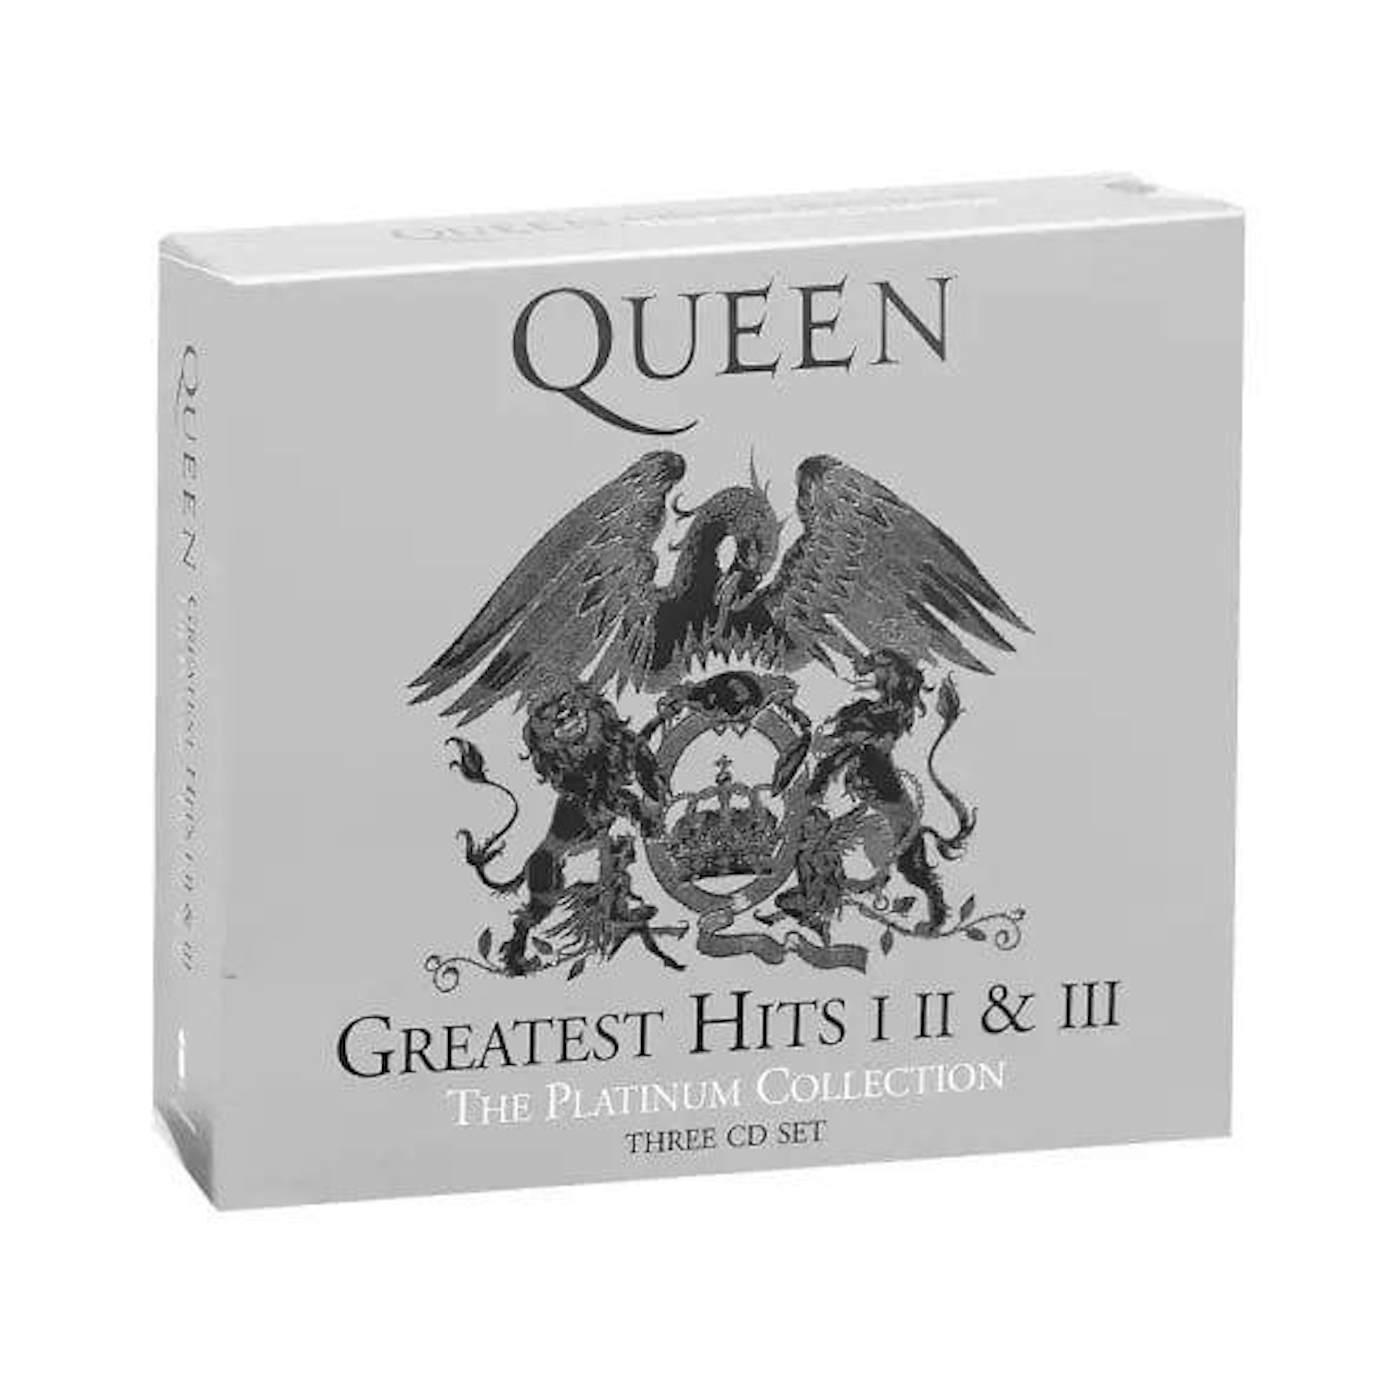 Queen - Greatest Hits I, II & III - The Platinum Collection